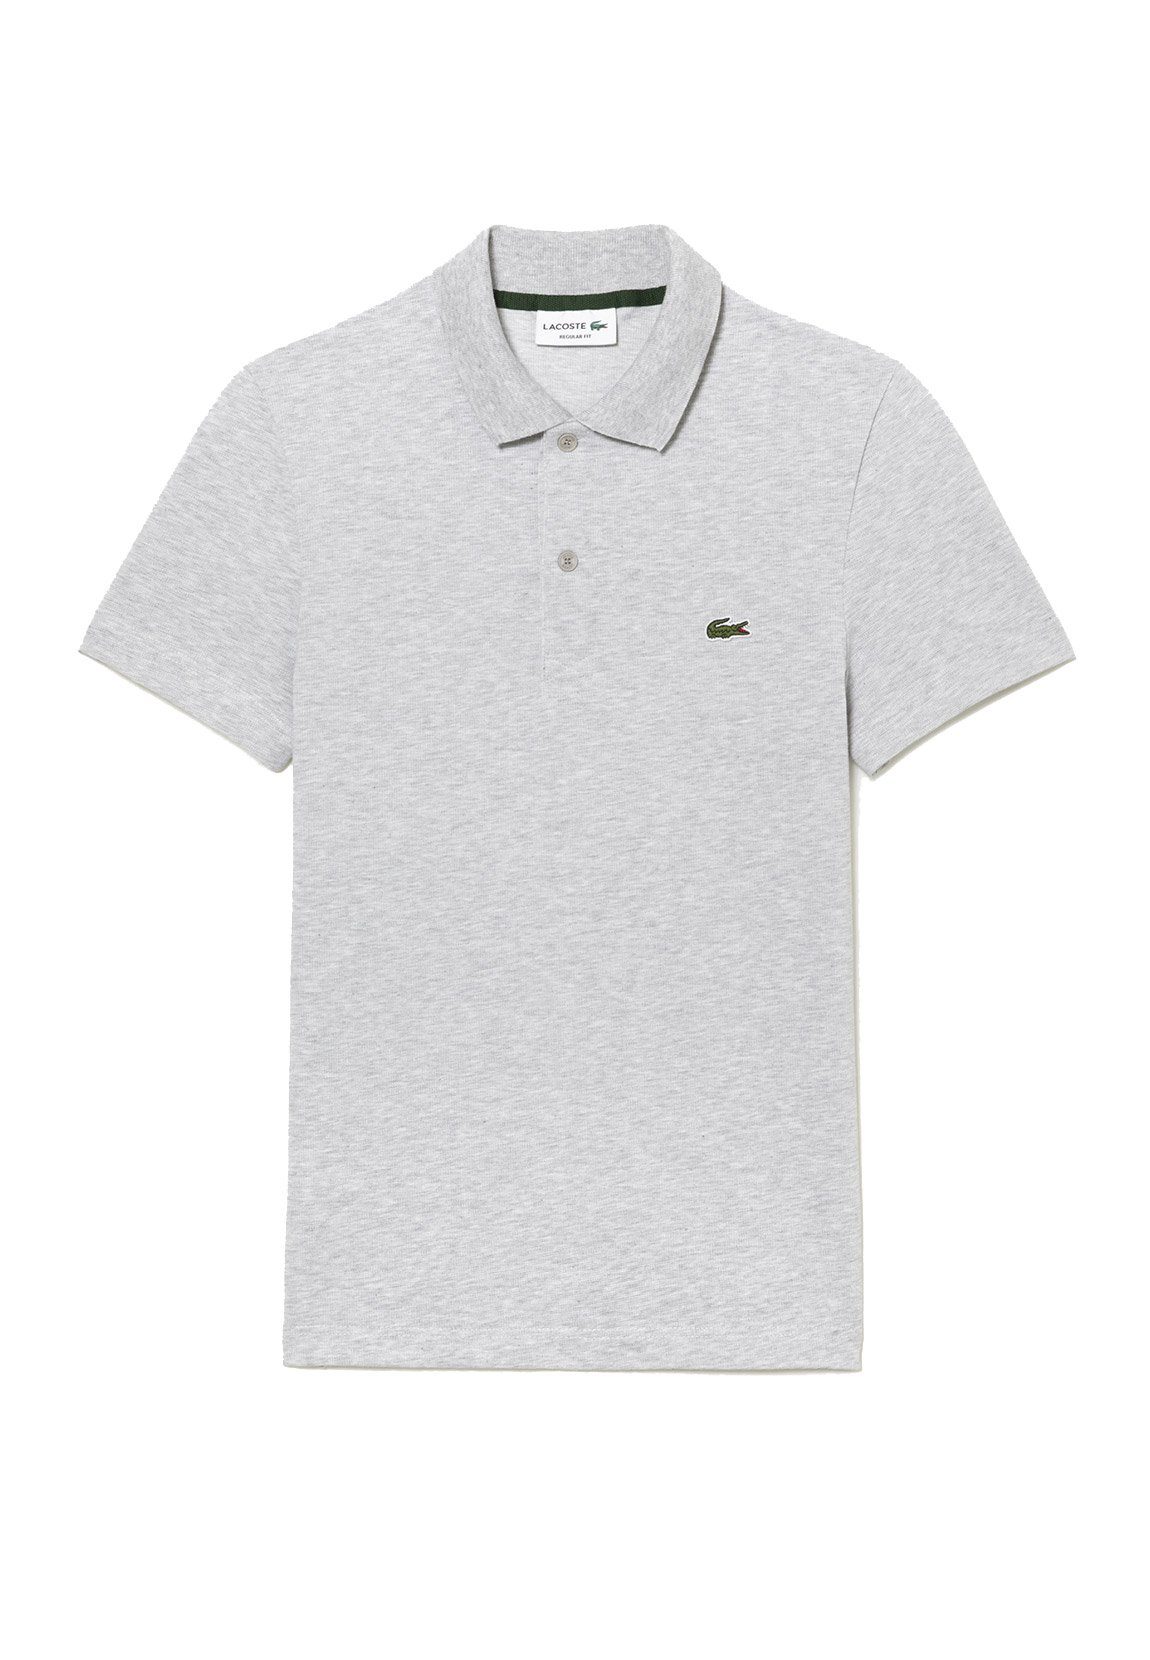 Lacoste Poloshirt Lacoste Herren Polo CHEMISE COL BORDS DH0783 Argent Chine